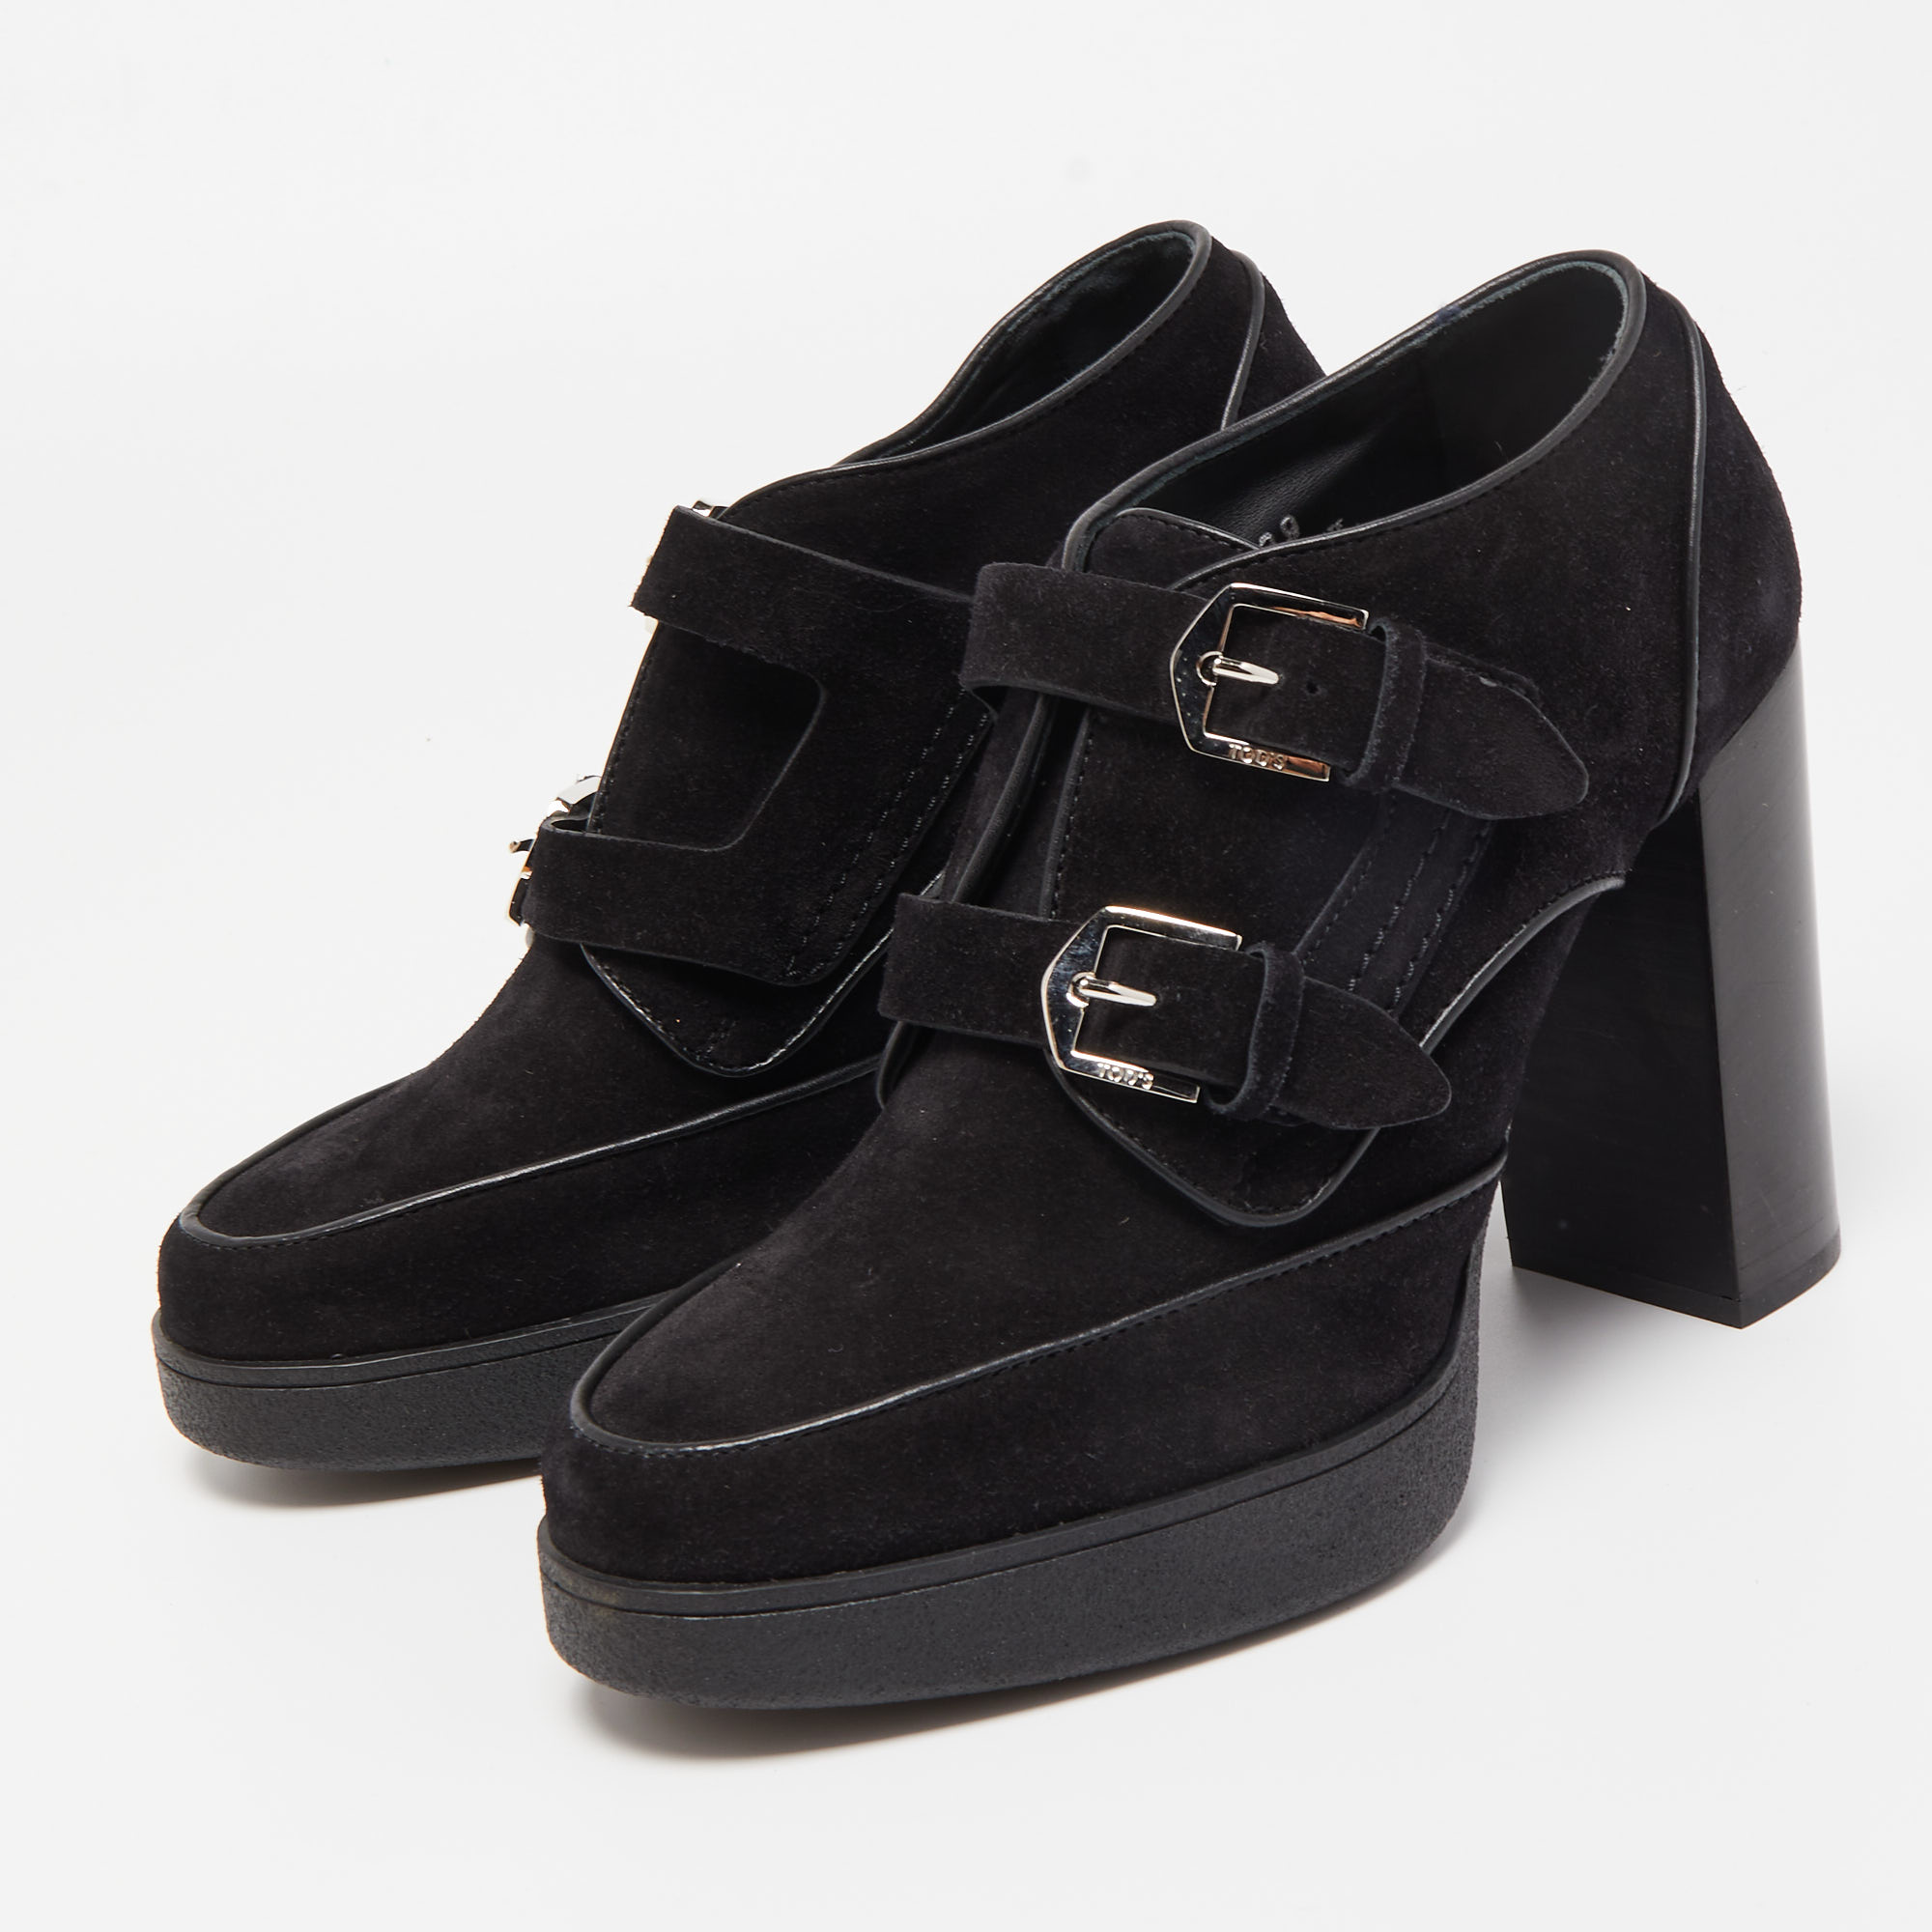 

Tod's Black Suede Buckle Details Ankle Booties Size